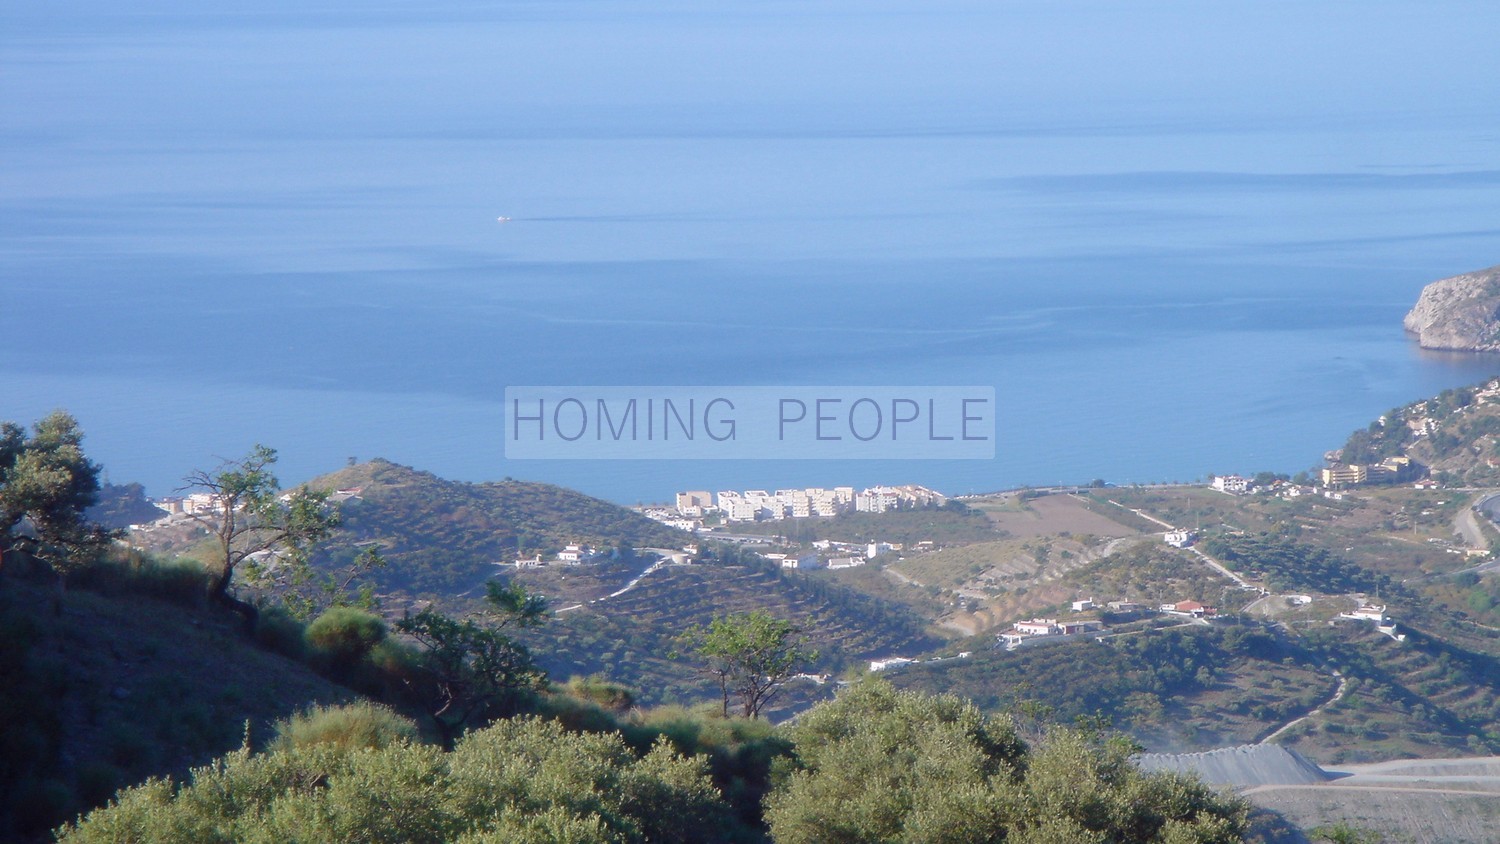 Plot of land with a flat area... and breathtaking views over the bay !